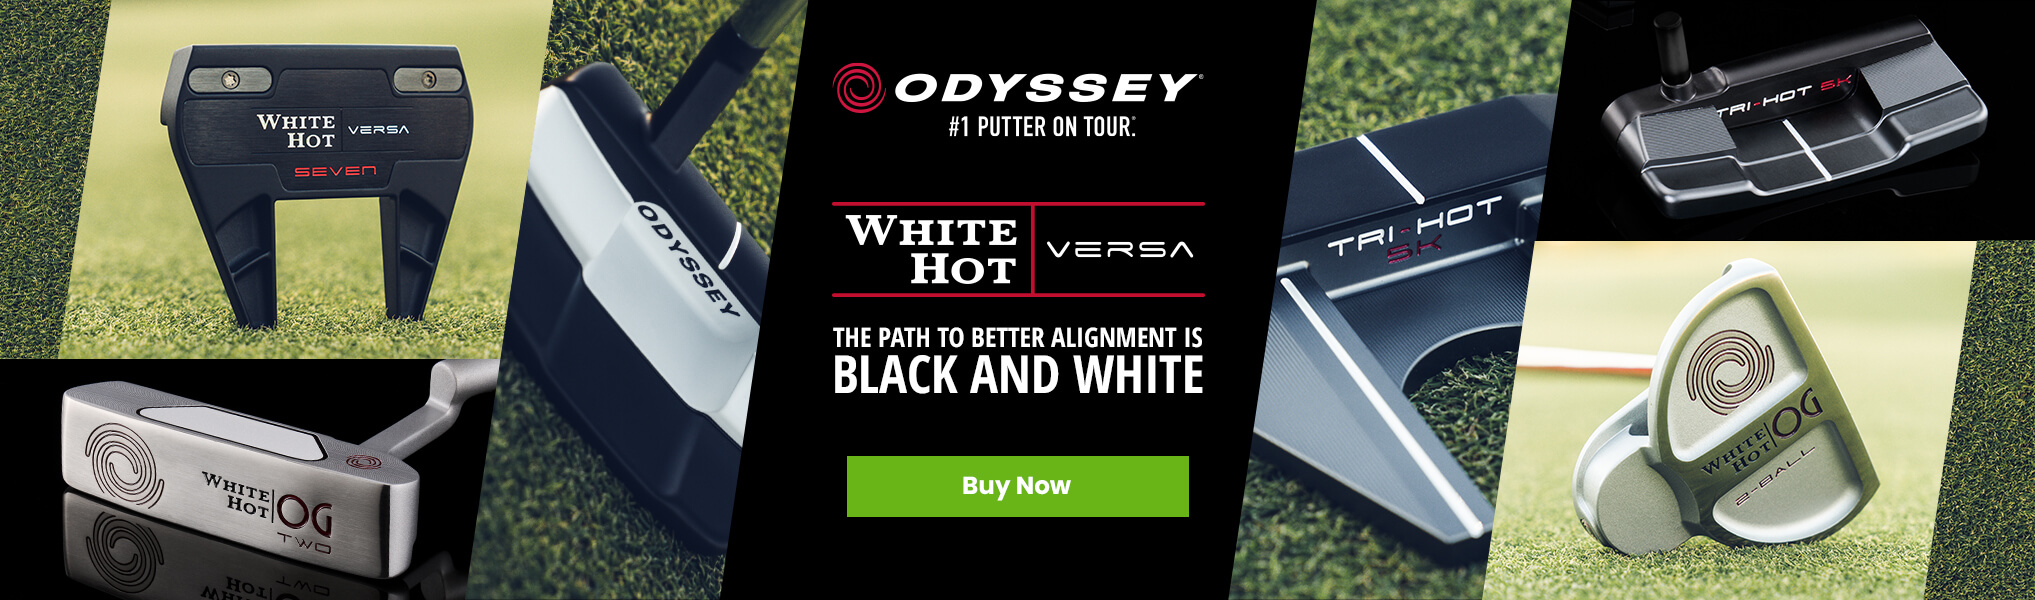 Odyssey Putters Available Now!